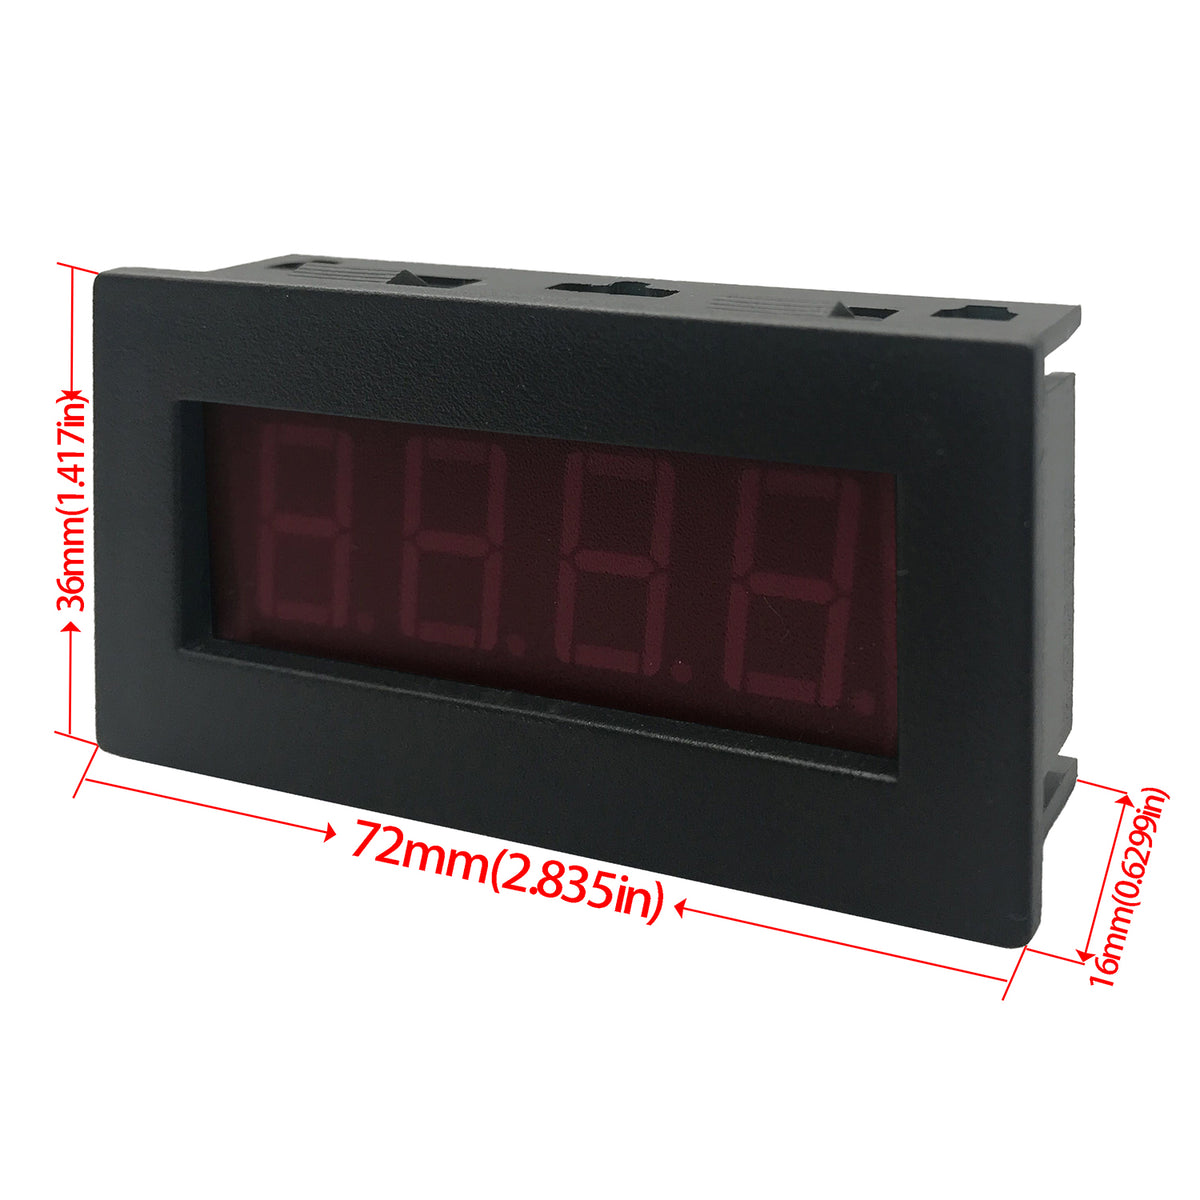 4 Digital LED Display Tachometer RPM Speed Meter Panel Inductive Hall Effect Sensor NPN Proximity Switch Red/Blue Blue 